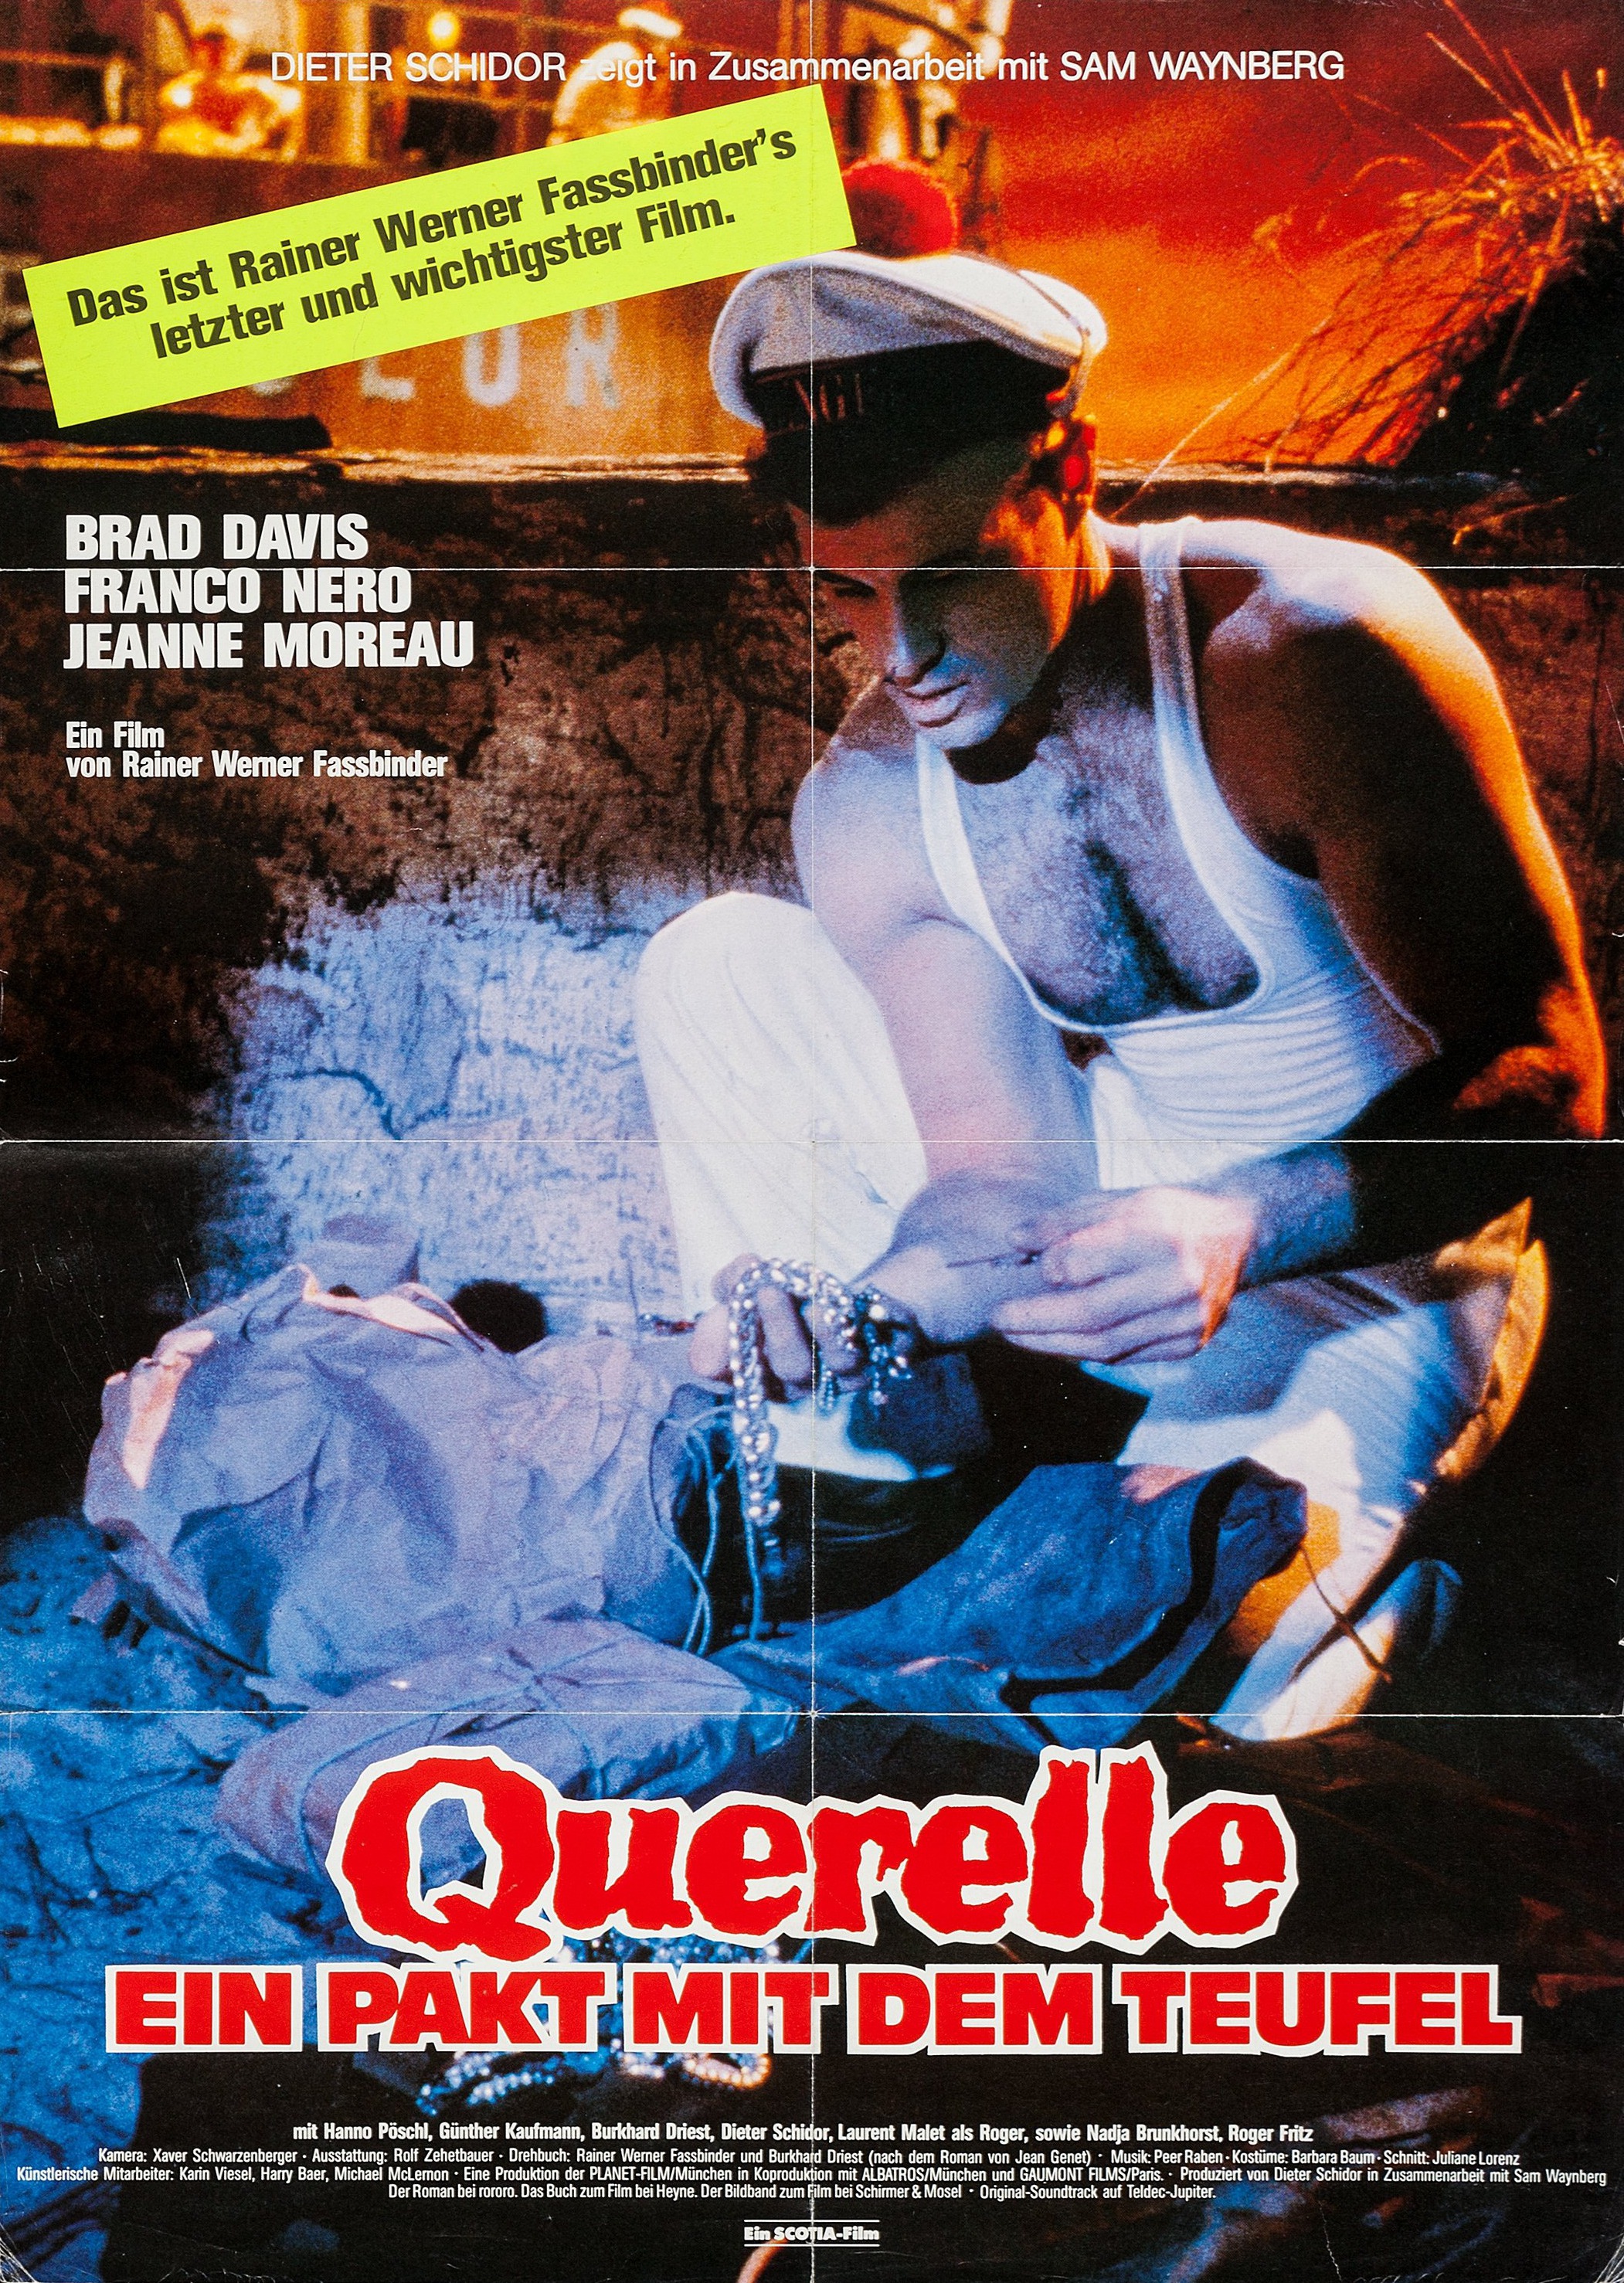 Mega Sized Movie Poster Image for Querelle (#4 of 7)